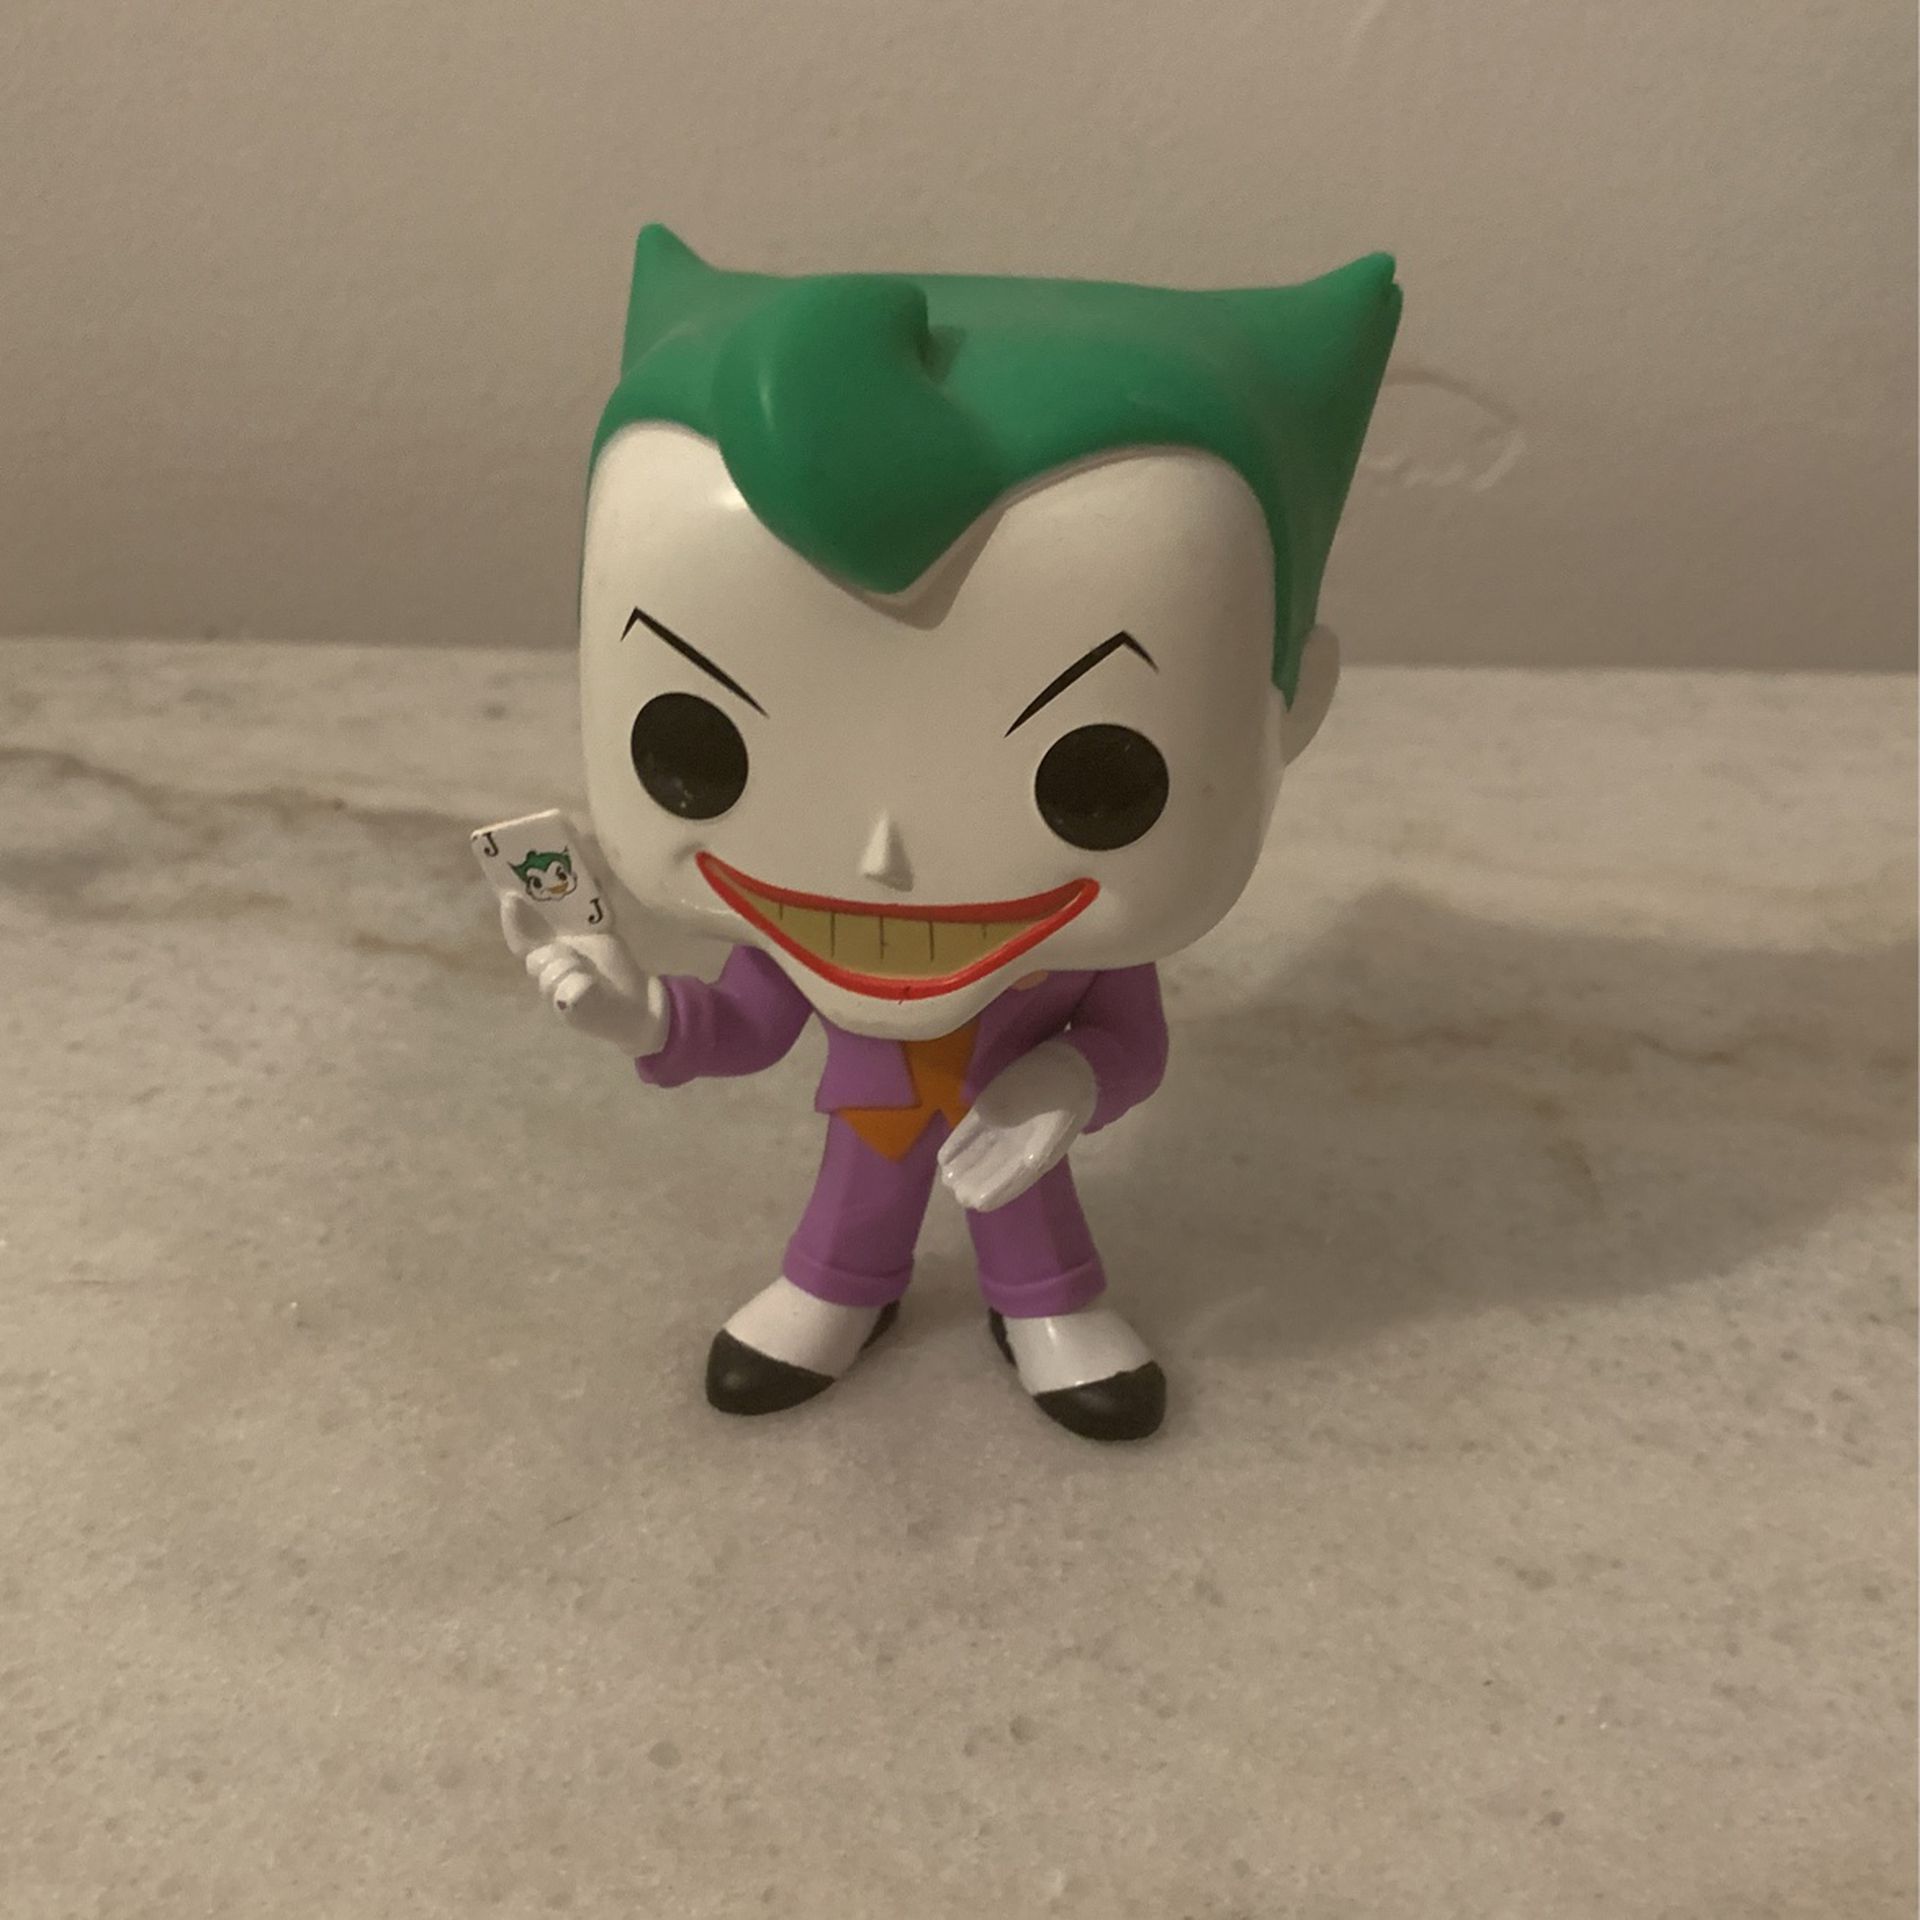 Funko The Animated Series The Joker TM #155 Vinyl Action Figures Pop! Multicolor Model Toys Collections Birthday gift toy ornaments - w/Plastic prote